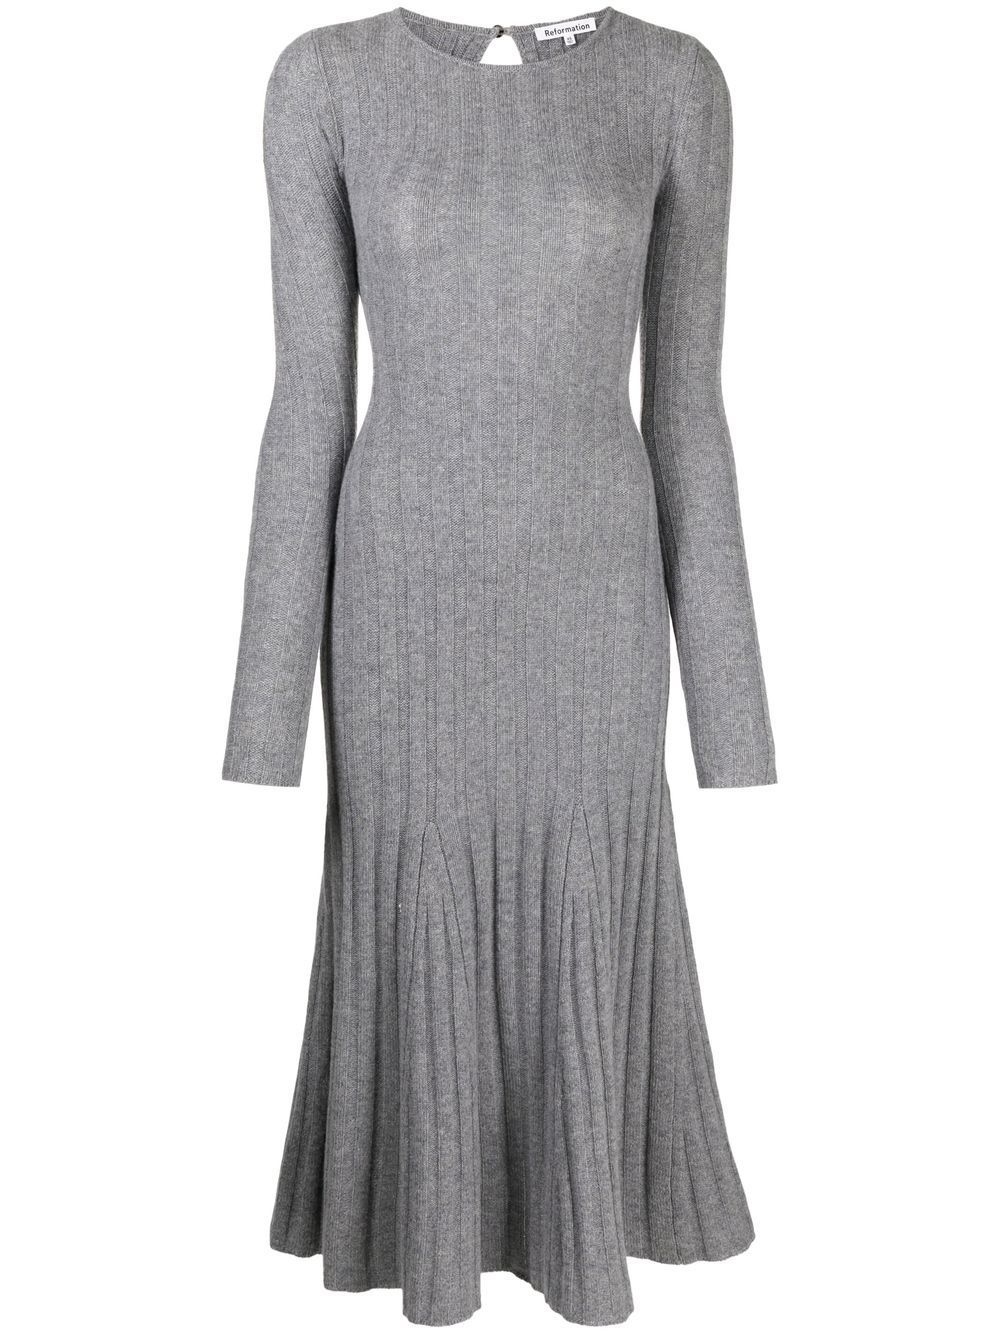 Evan cashmere knitted dress | Farfetch Global